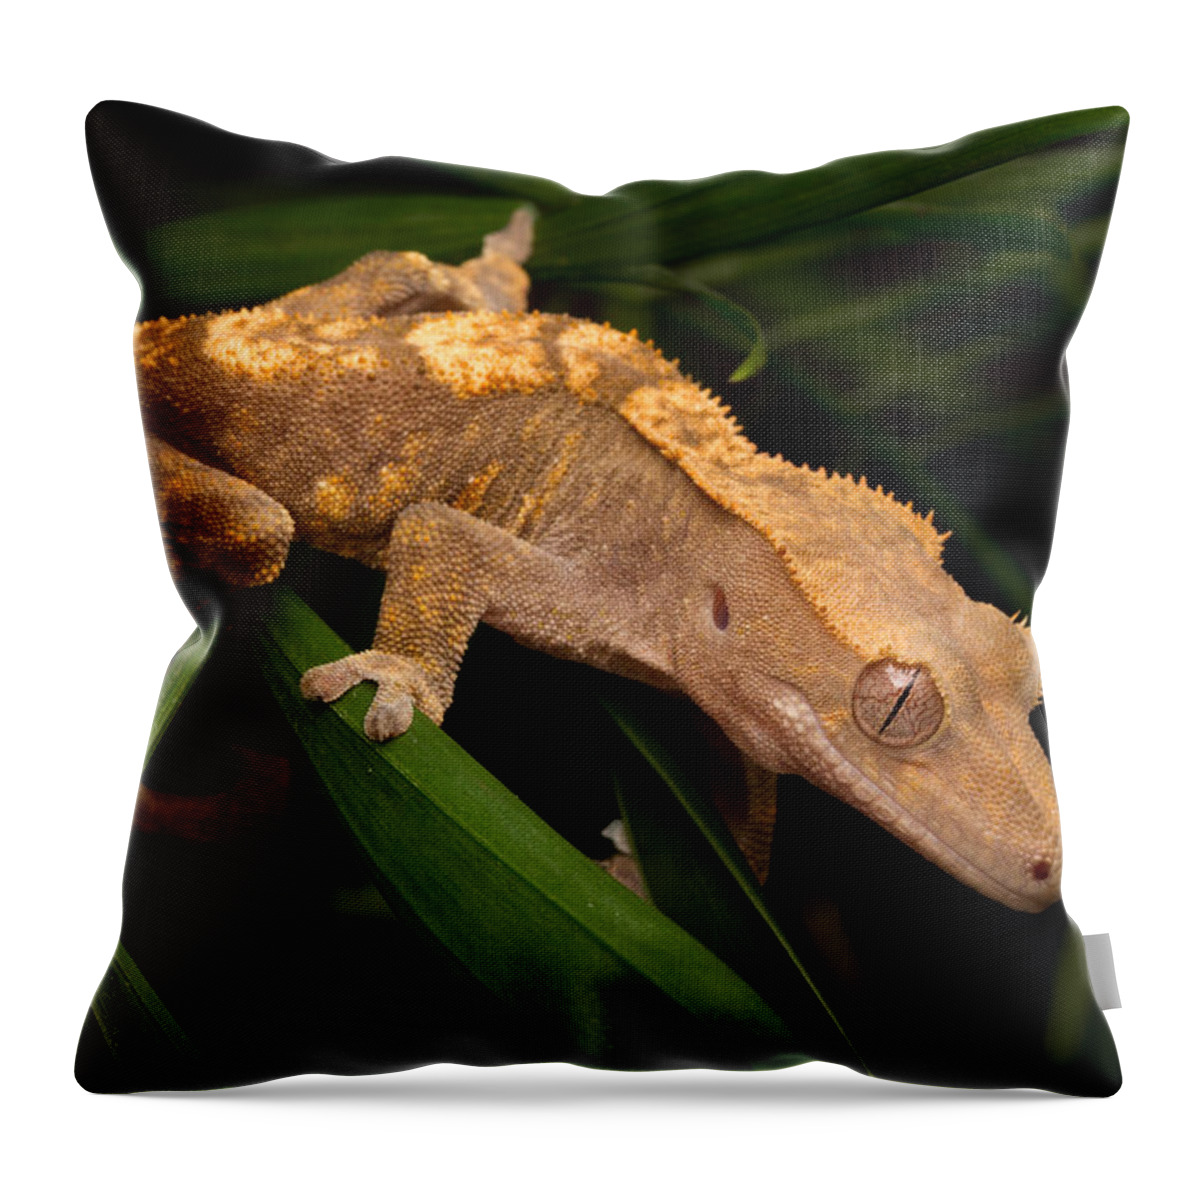 New Caledonian Crested Gecko Throw Pillow featuring the photograph Crested Gecko Rhacodactylus Ciliatus by David Kenny